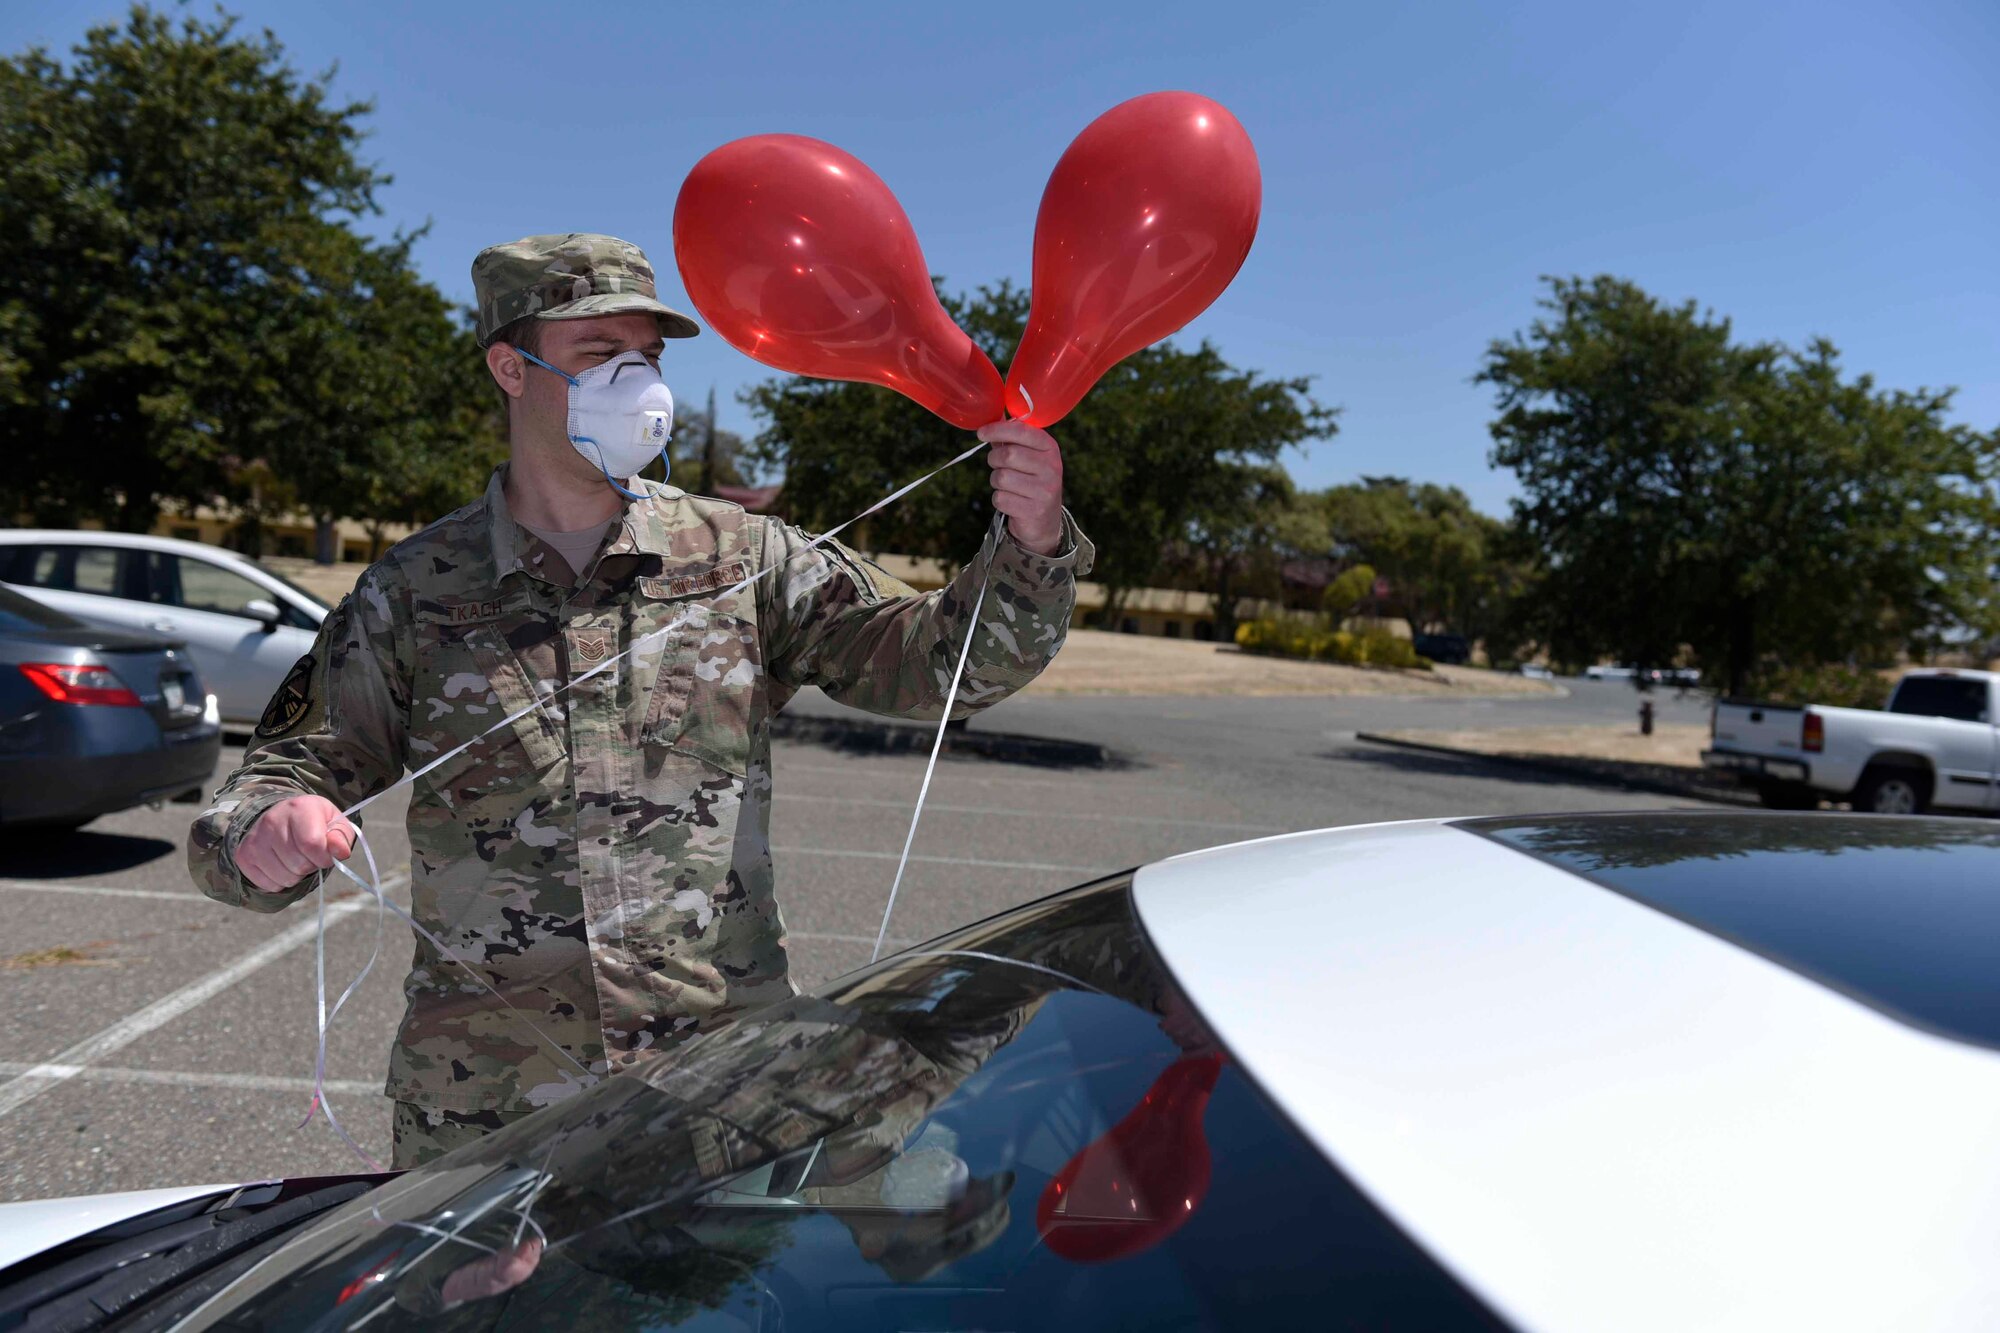 U.S. Air Force Tech. Sgt. Nicholas Tkach, 60th Operations Support Squadron aircrew flight equipment non-commissioned officer in charge, decorates his car with balloons during a master sergeant release celebration July 23, 2020, at Travis Air Force Base, California. Travis AFB Airmen selected for promotion to master sergeant celebrated by participating in a parade in order to adhere to COVID-19 social distancing guidelines. (U.S. Air Force photo by Airman 1st Class Cameron Otte)